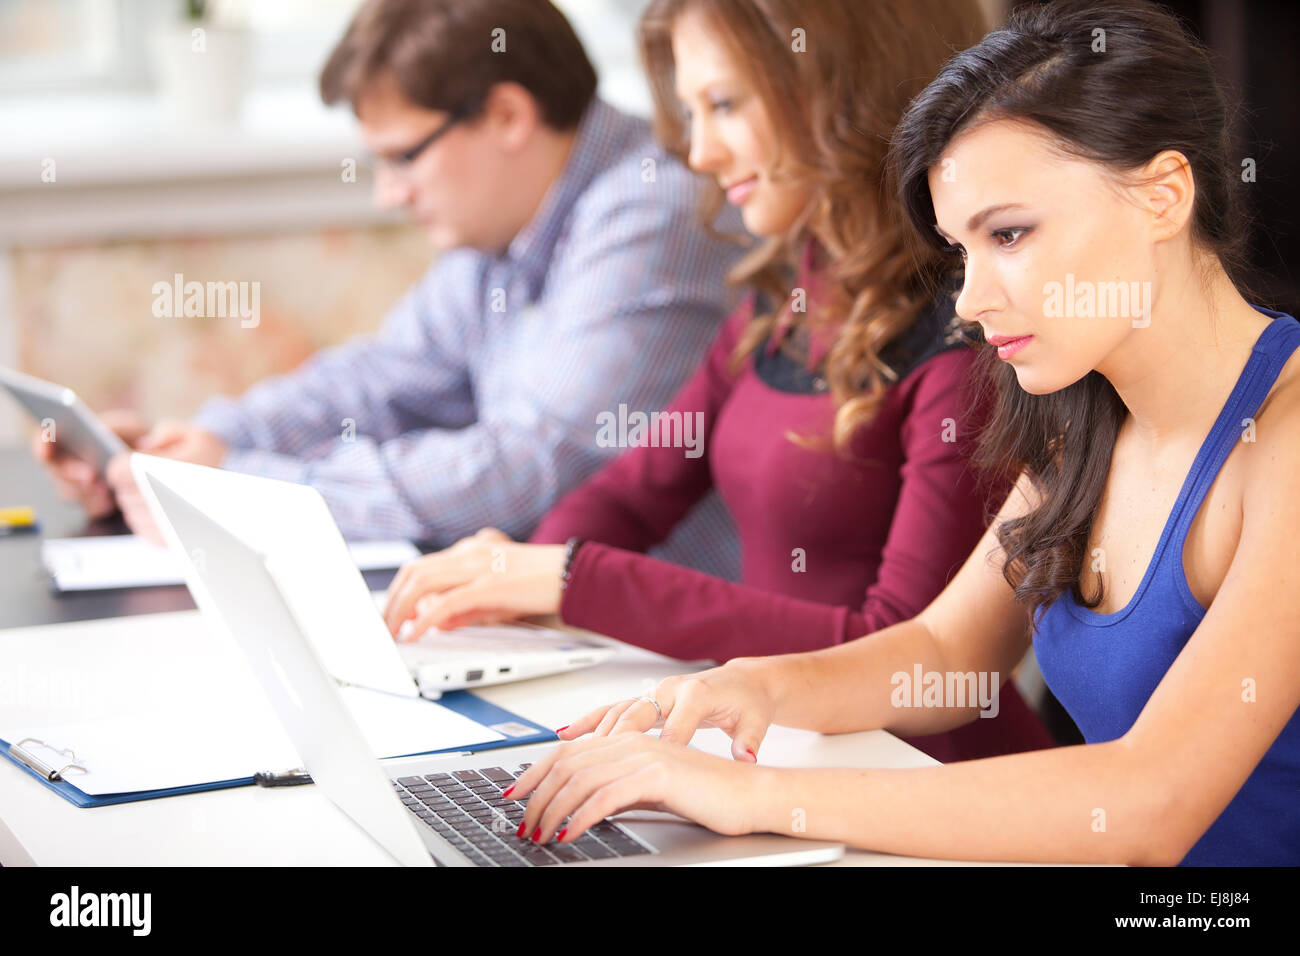 group of students Stock Photo